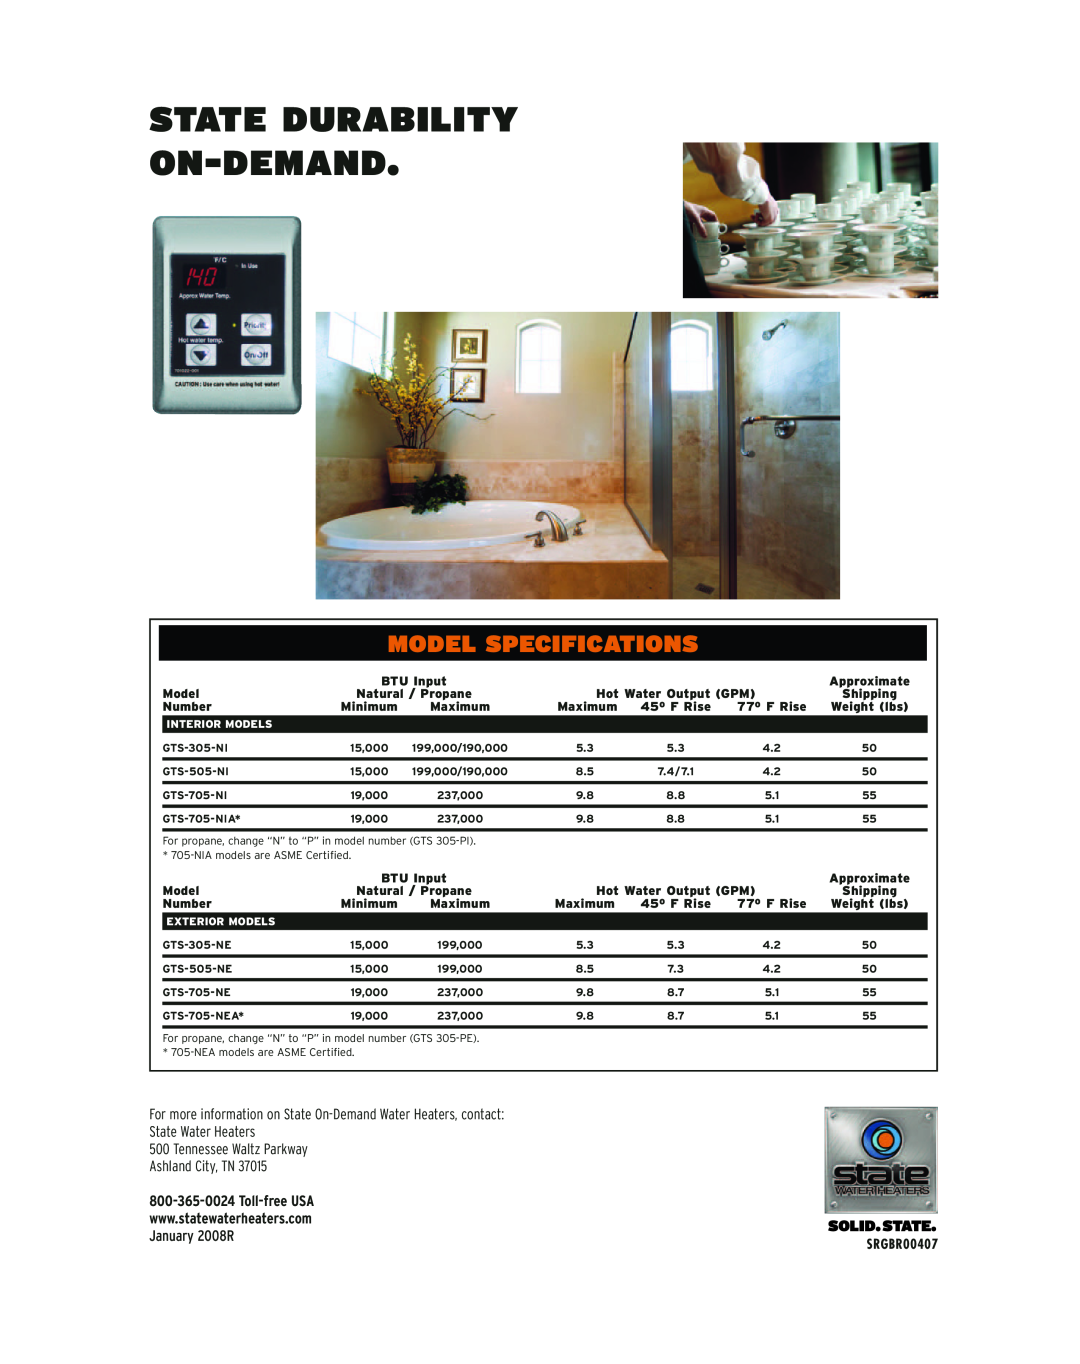 State Industries Gas-Fired Water Heaters manual State Durability On-Demand, January 2008R, Model Specifications 